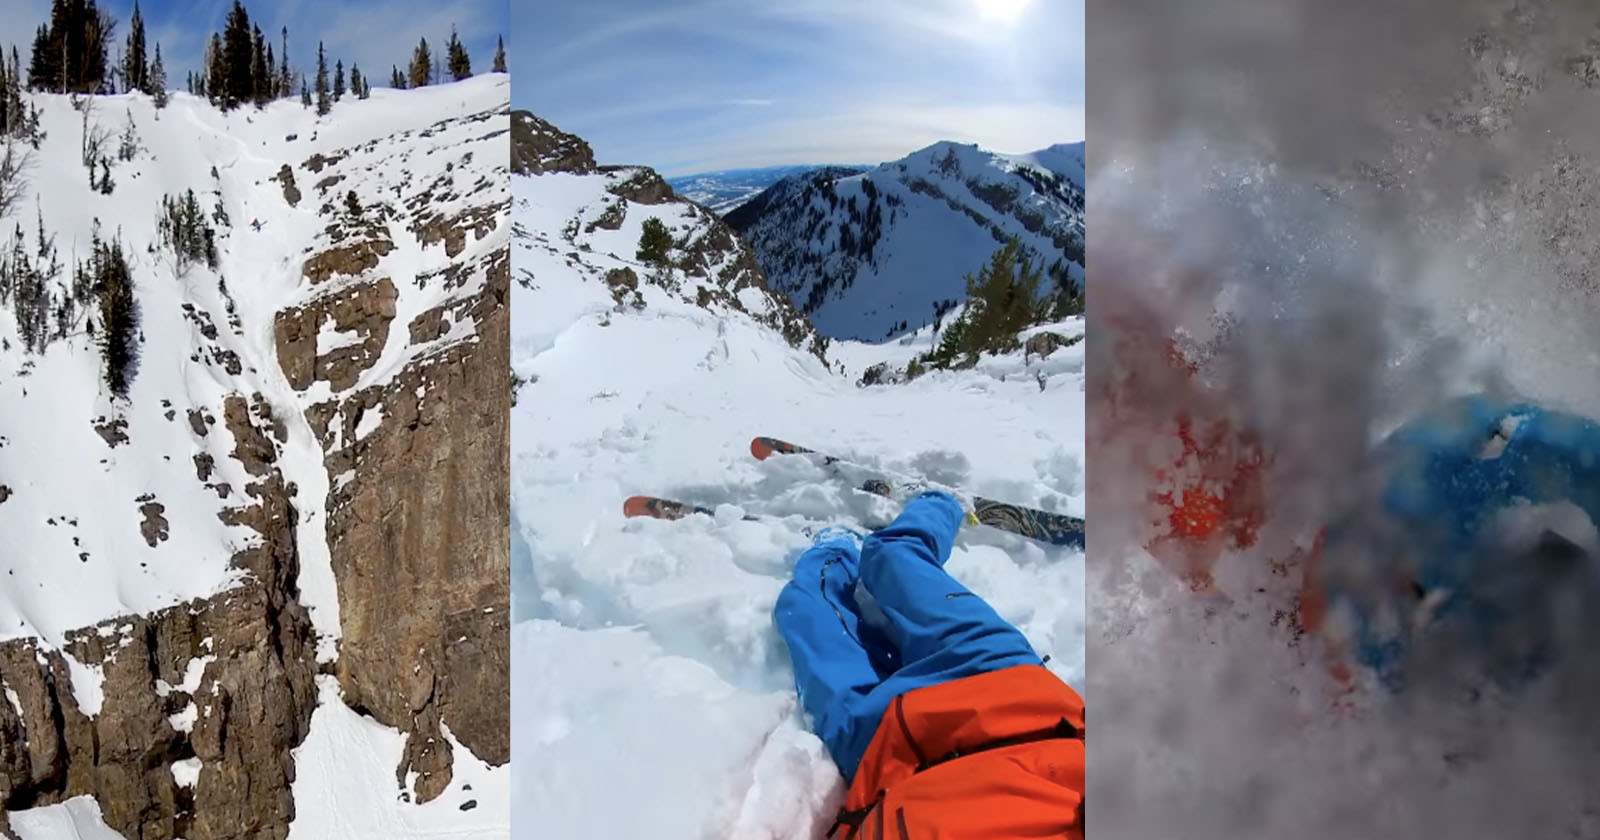 Skier Captures Scary POV Footage as Avalanche Throws Him off Mountain